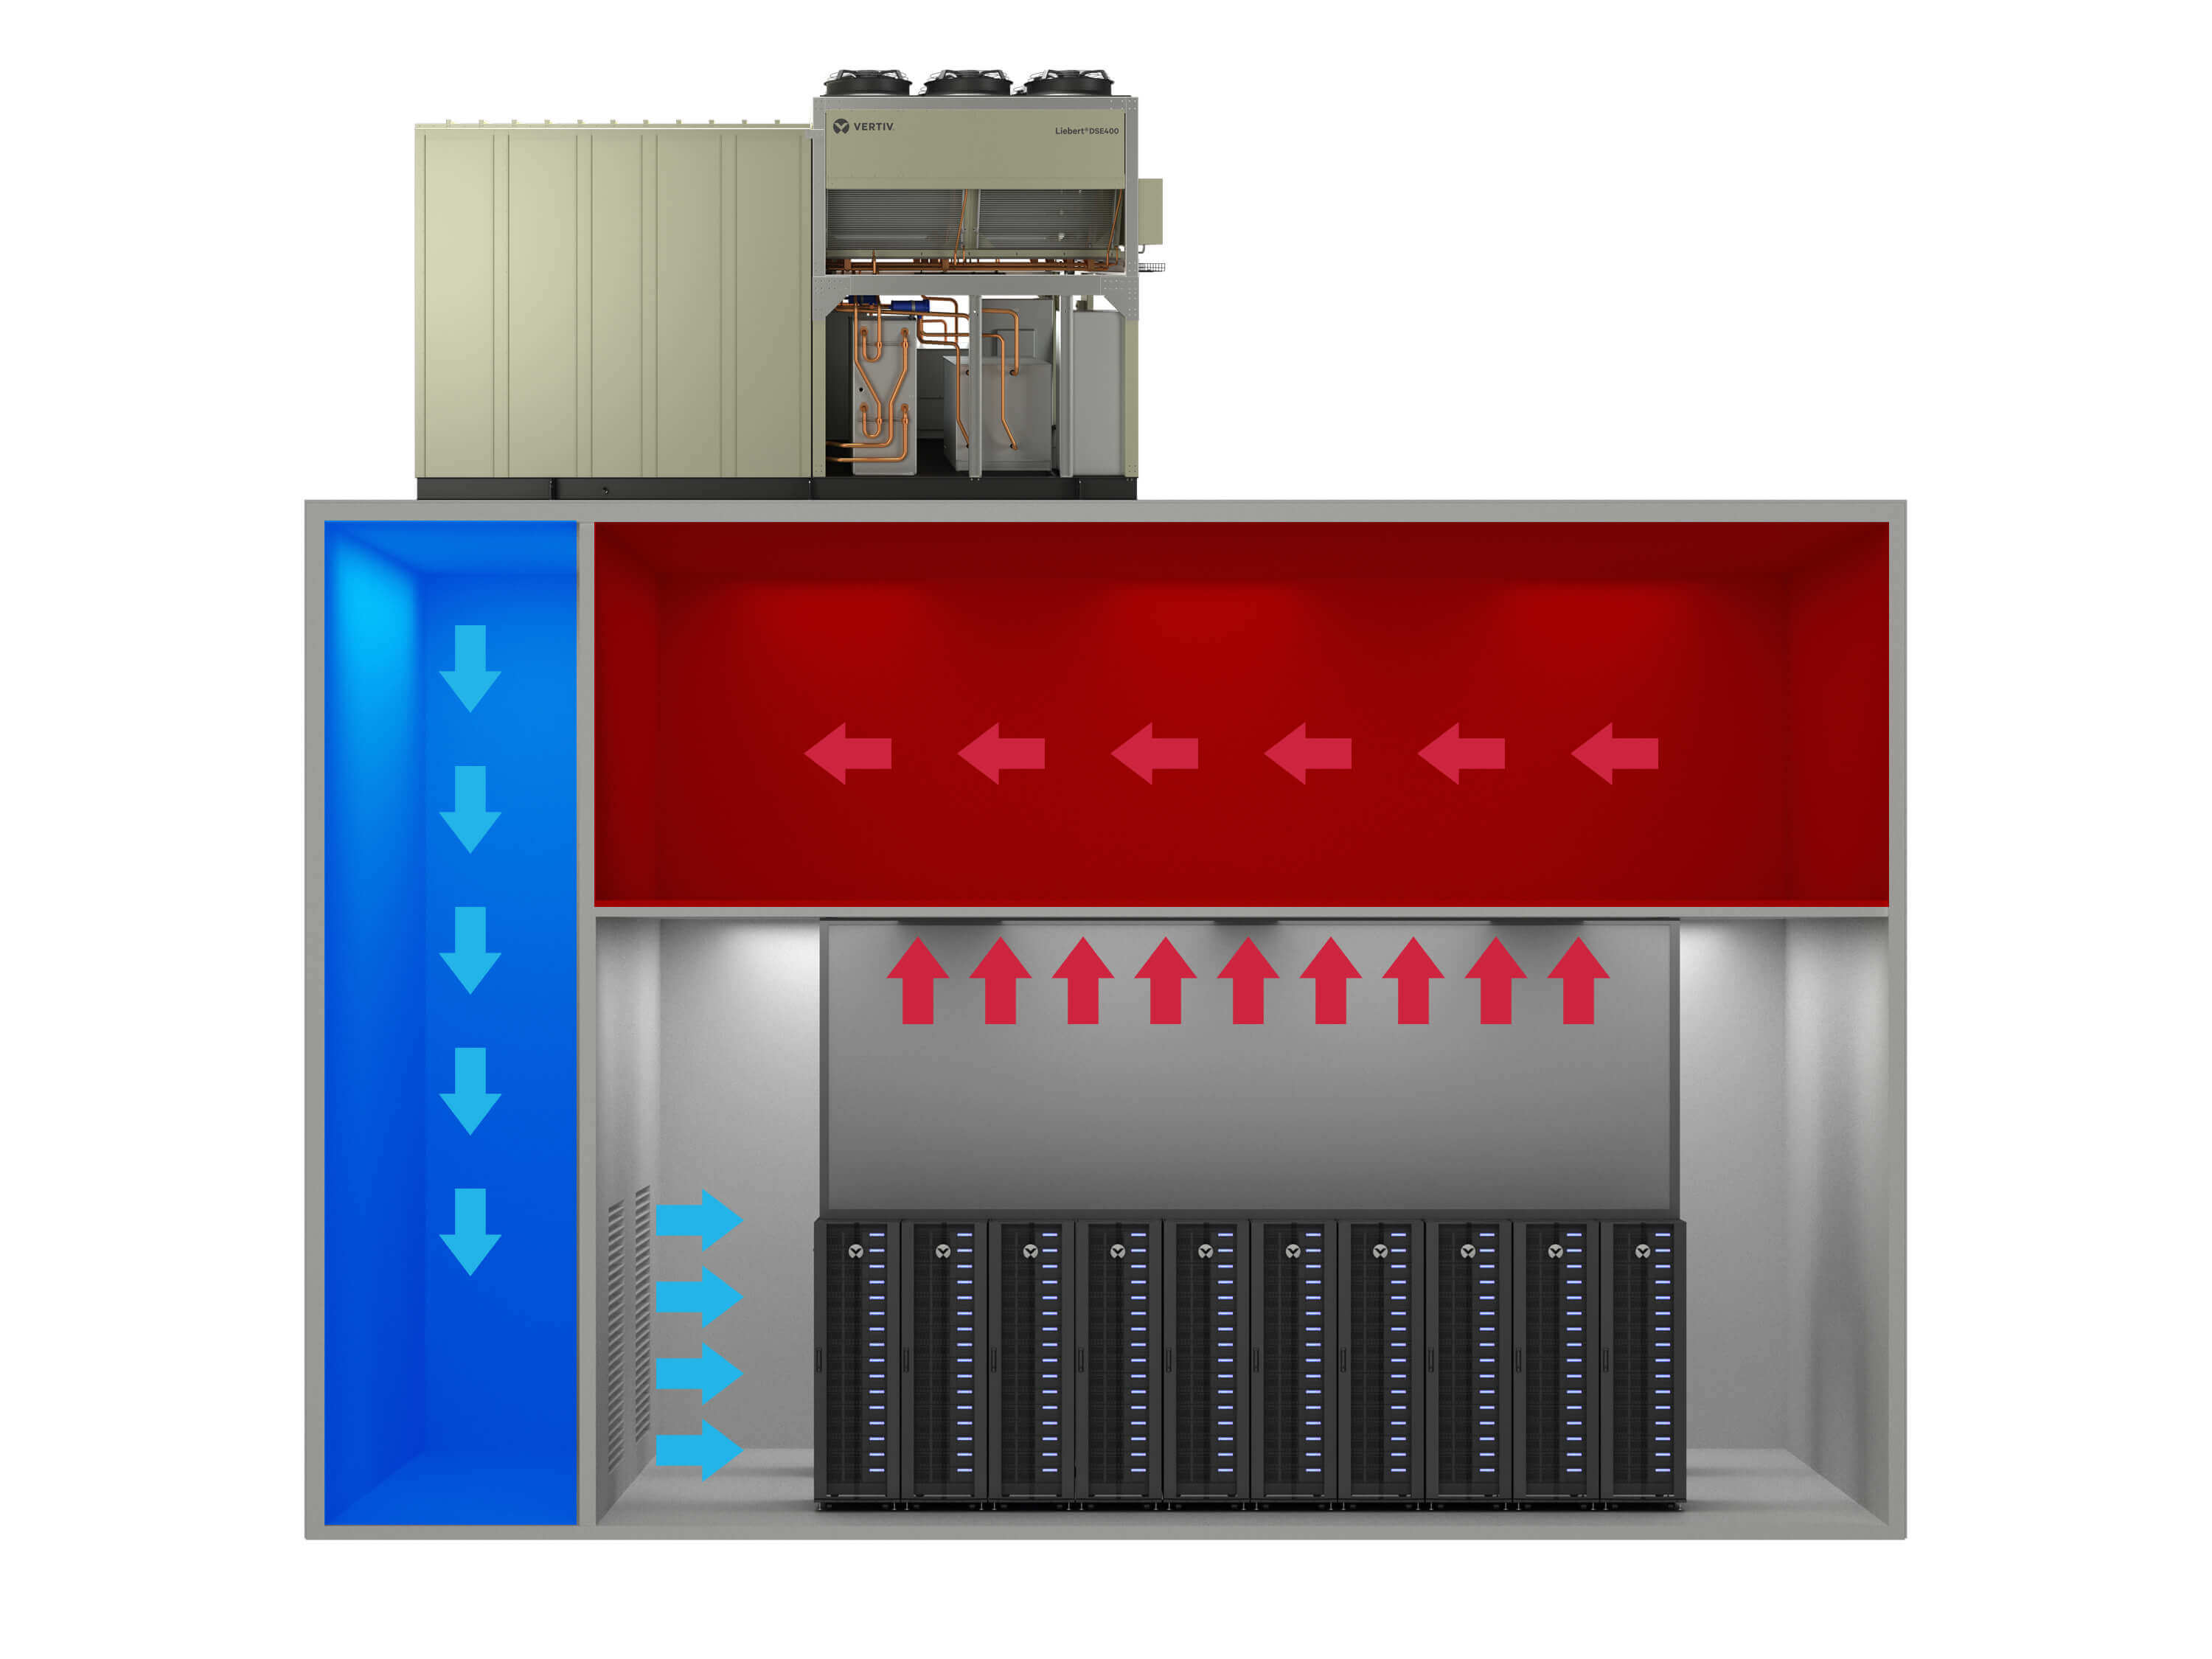 ITS Liebert DSE Packaged Free-Cooling Solution, 400-500kW Draw-Thru Rooftop Configuration